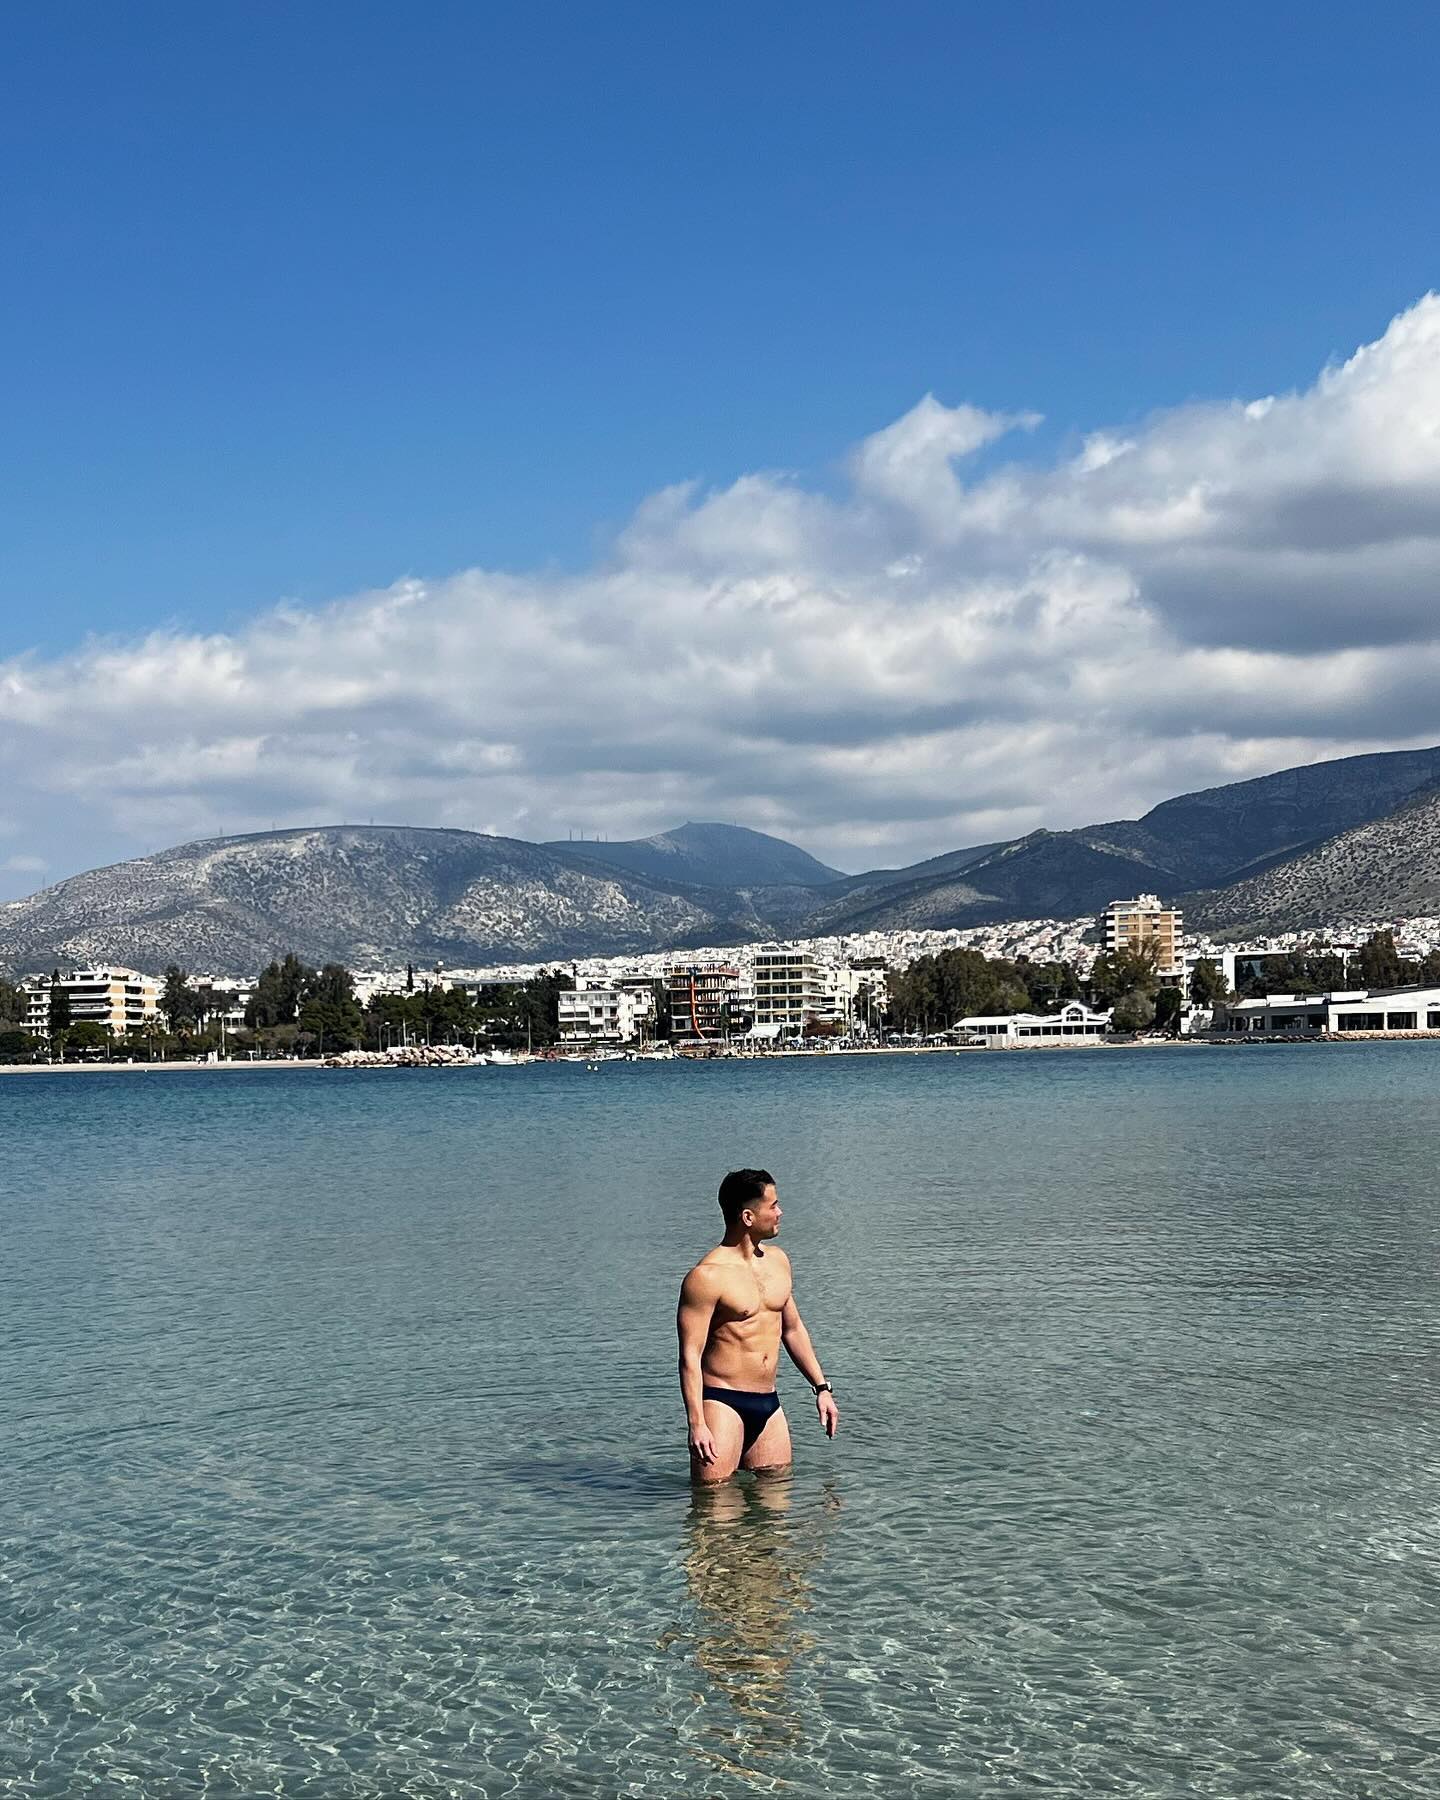 just a hawai’i boy in perpetual search for the sun and ocean. ☀️🏝️

#greece #athens #ocean #sun #speedo #gay #lgbt #gayboy